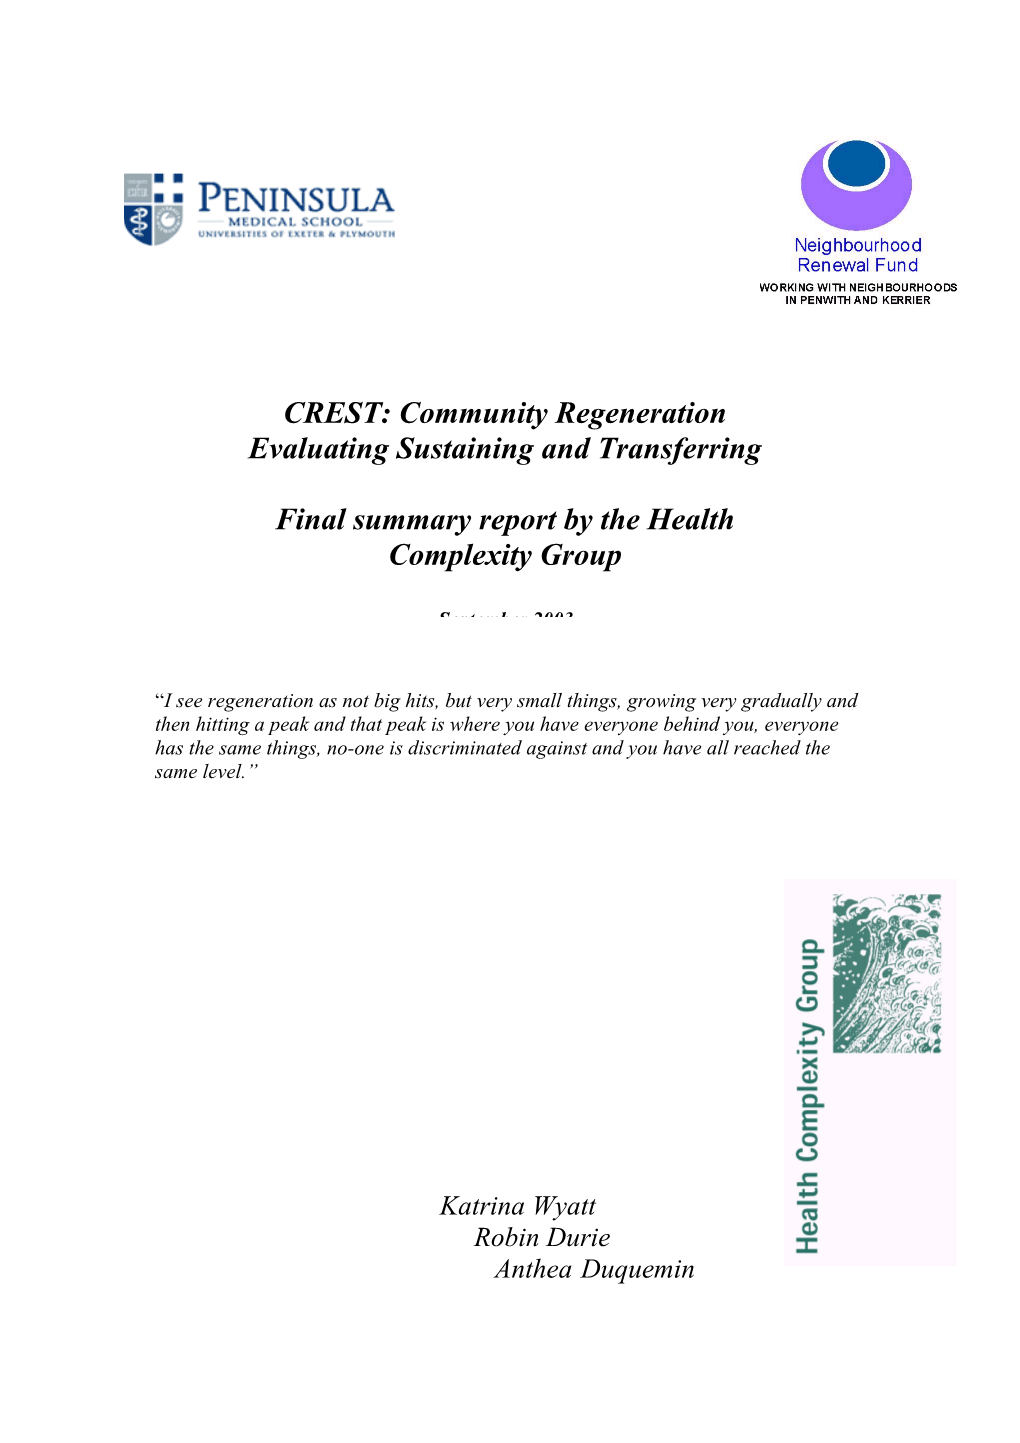 Final Summary Report by the Health Complexity Group